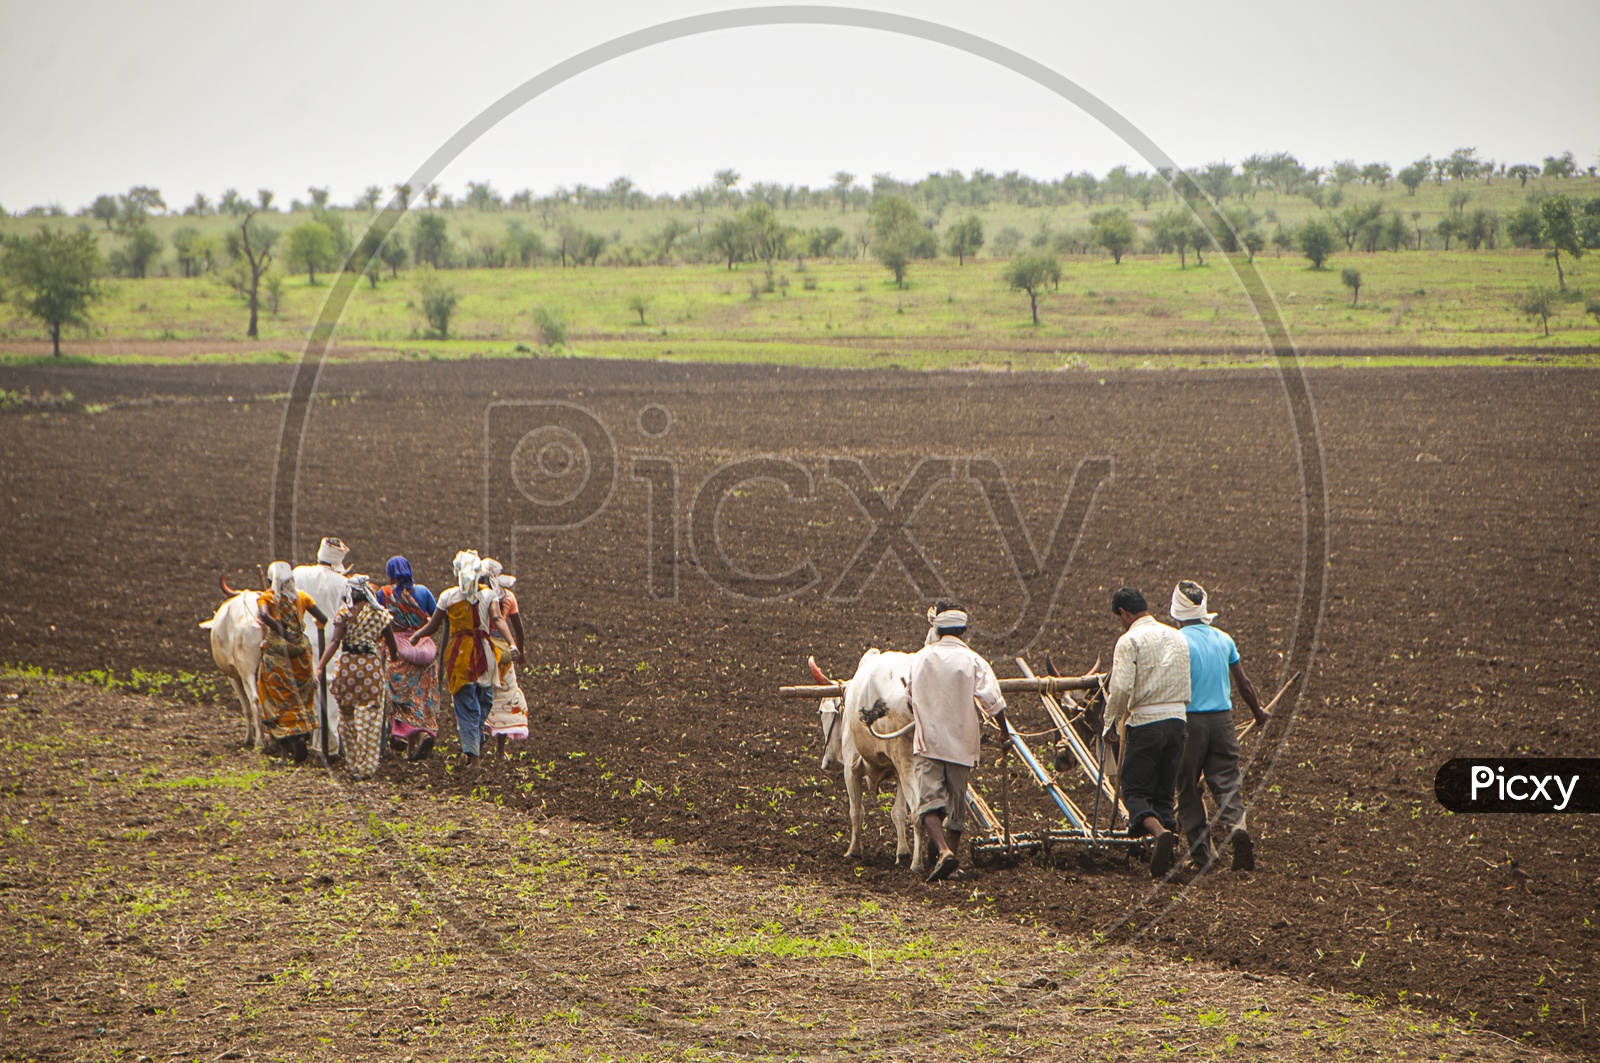 Farmers and workers are plowing in agricultural field